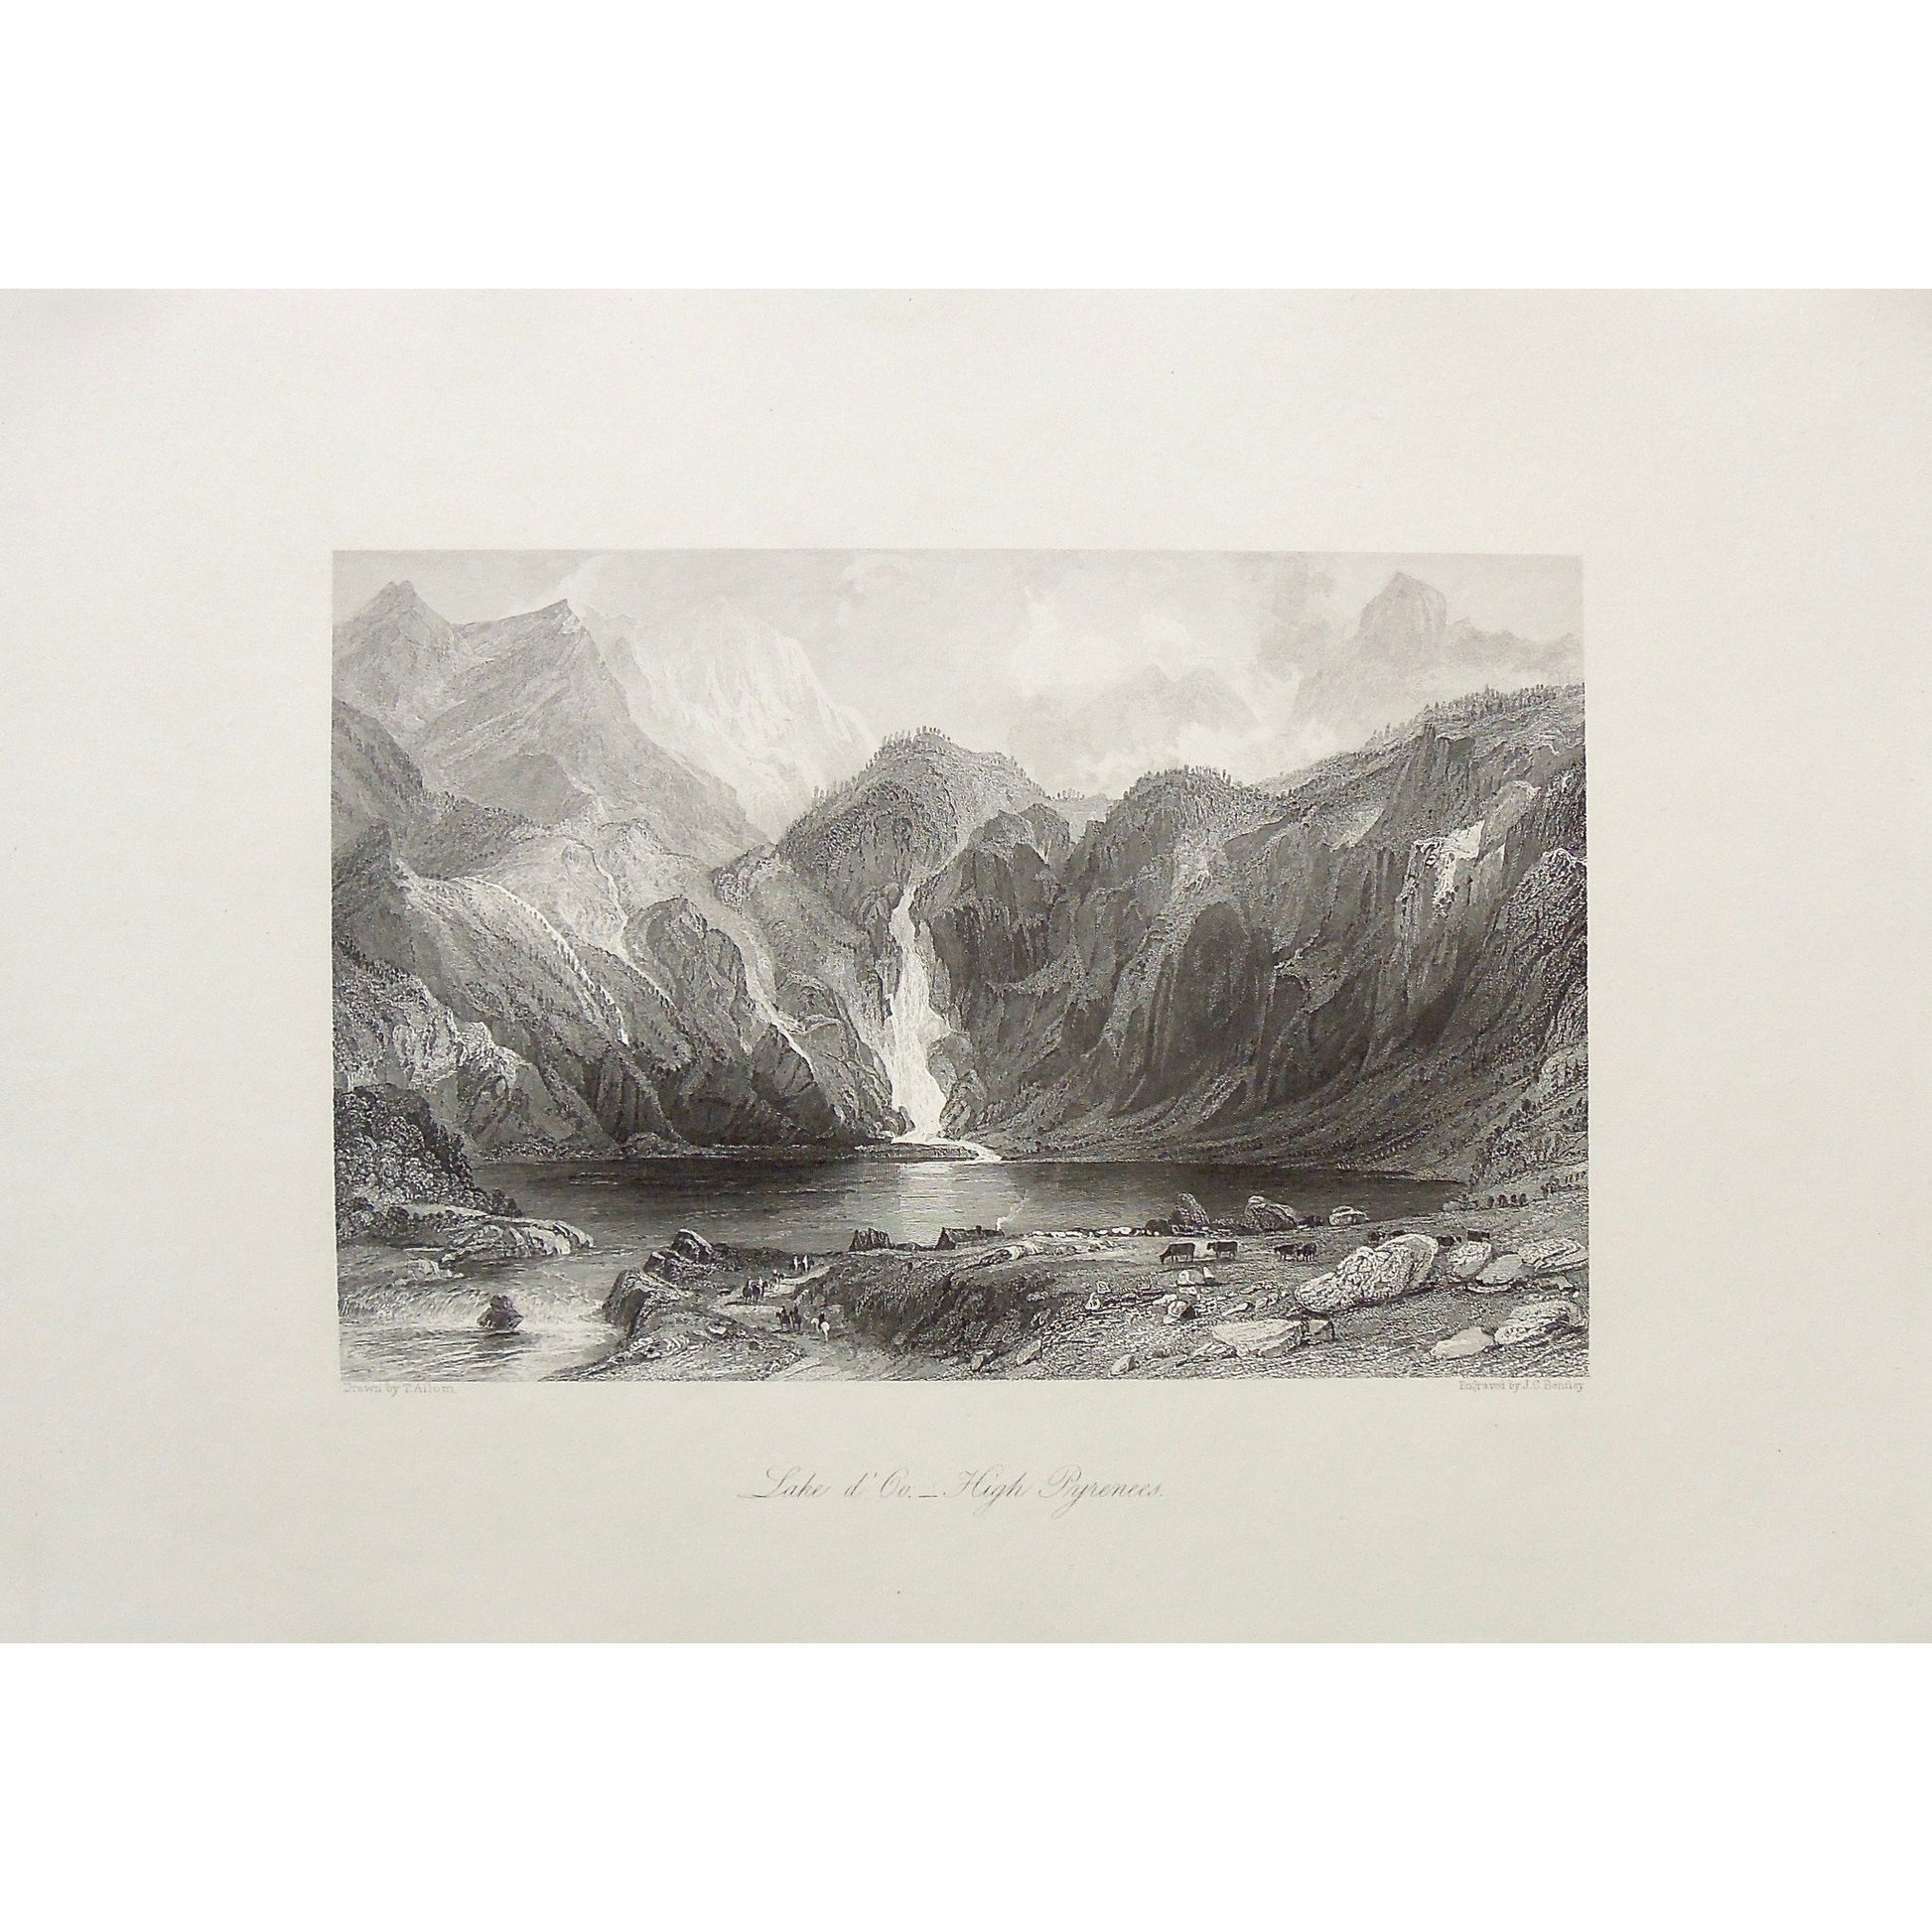 Lake d'Oo, Lac d'Oo, Pyrenees, Lake, Lac, Haute-Pyrenees, Pyrenees Mountains, Mountain range, waterfall, Cows, cattle, village, France, Commune of Oo, distant view, Bently, J. C. Bently, Allom, Thomas Allom, T. Allom, Steel engraving, Europe Illustrated, London Printing and Publishing Company, London, 1876-79, 1876, 1879, Sherer, John Sherer, Antique Print, Antique, Prints, Vintage, Vintage Art, Vintage Prints, Art, Wall art, Decor, wall decor, design, engraving, original, authentic, Collectors, Collectable